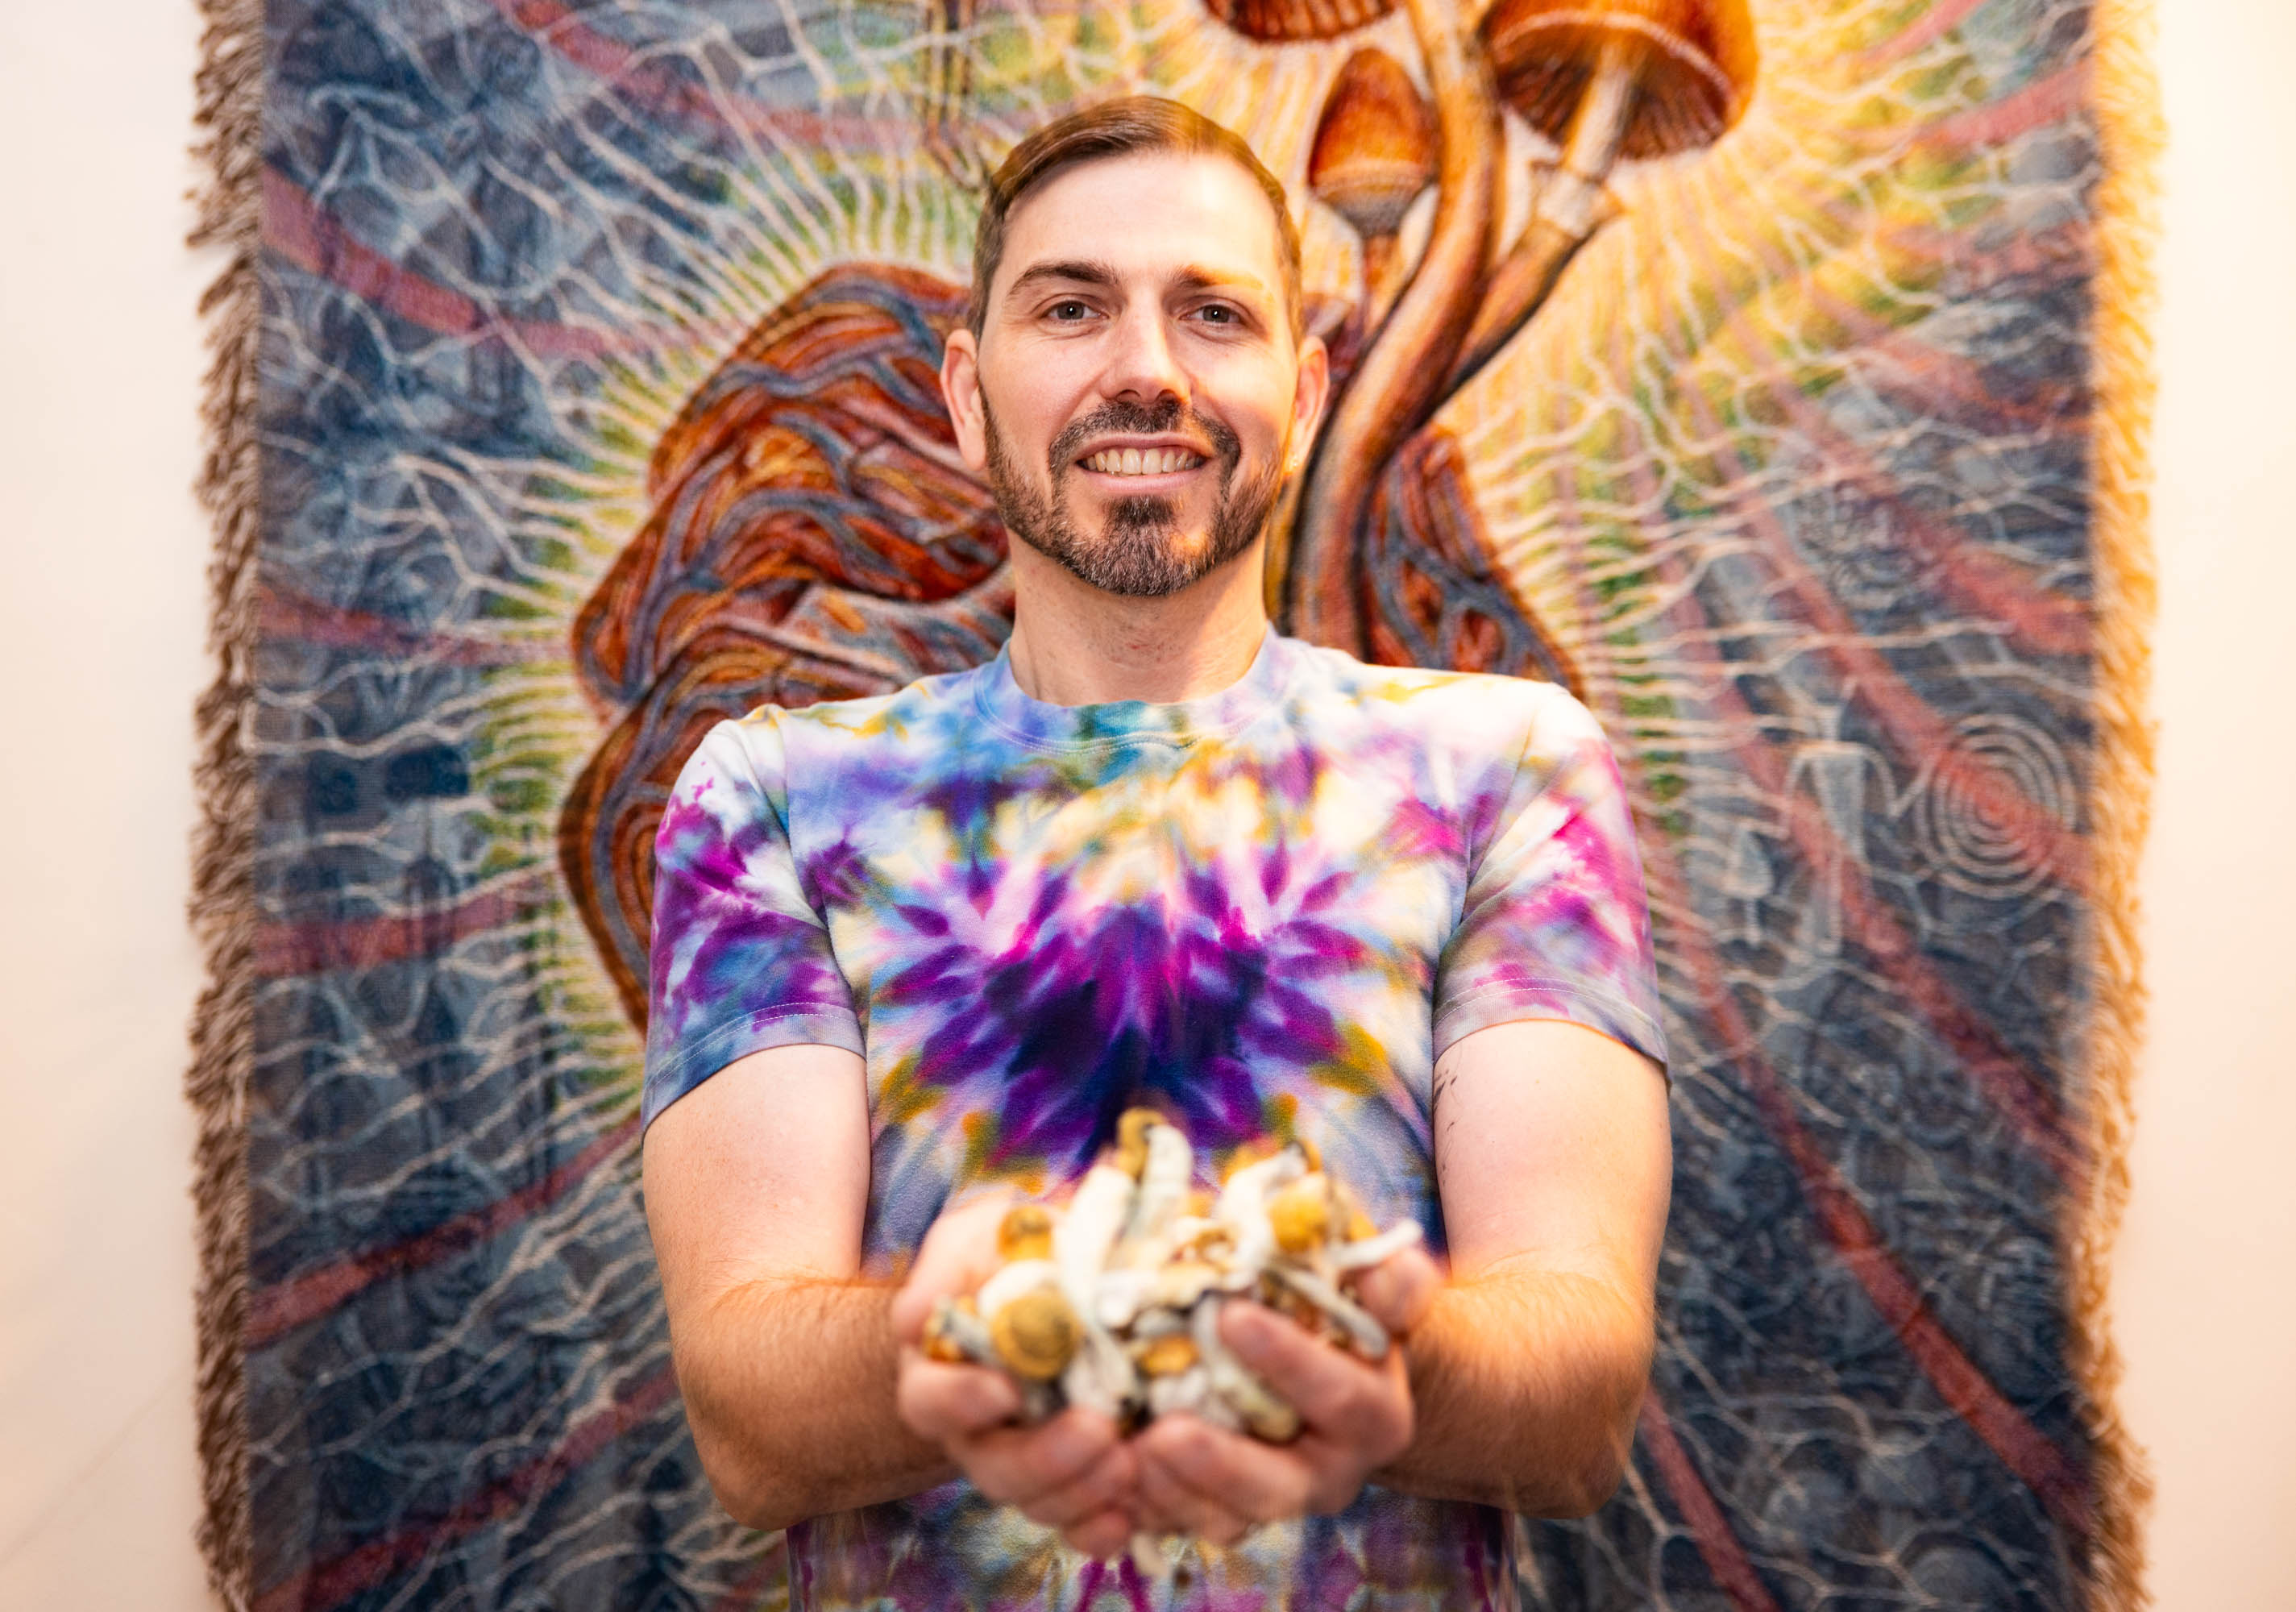 A smiling man in a tie-dye shirt holds magic mushrooms, standing before a colorful tapestry.